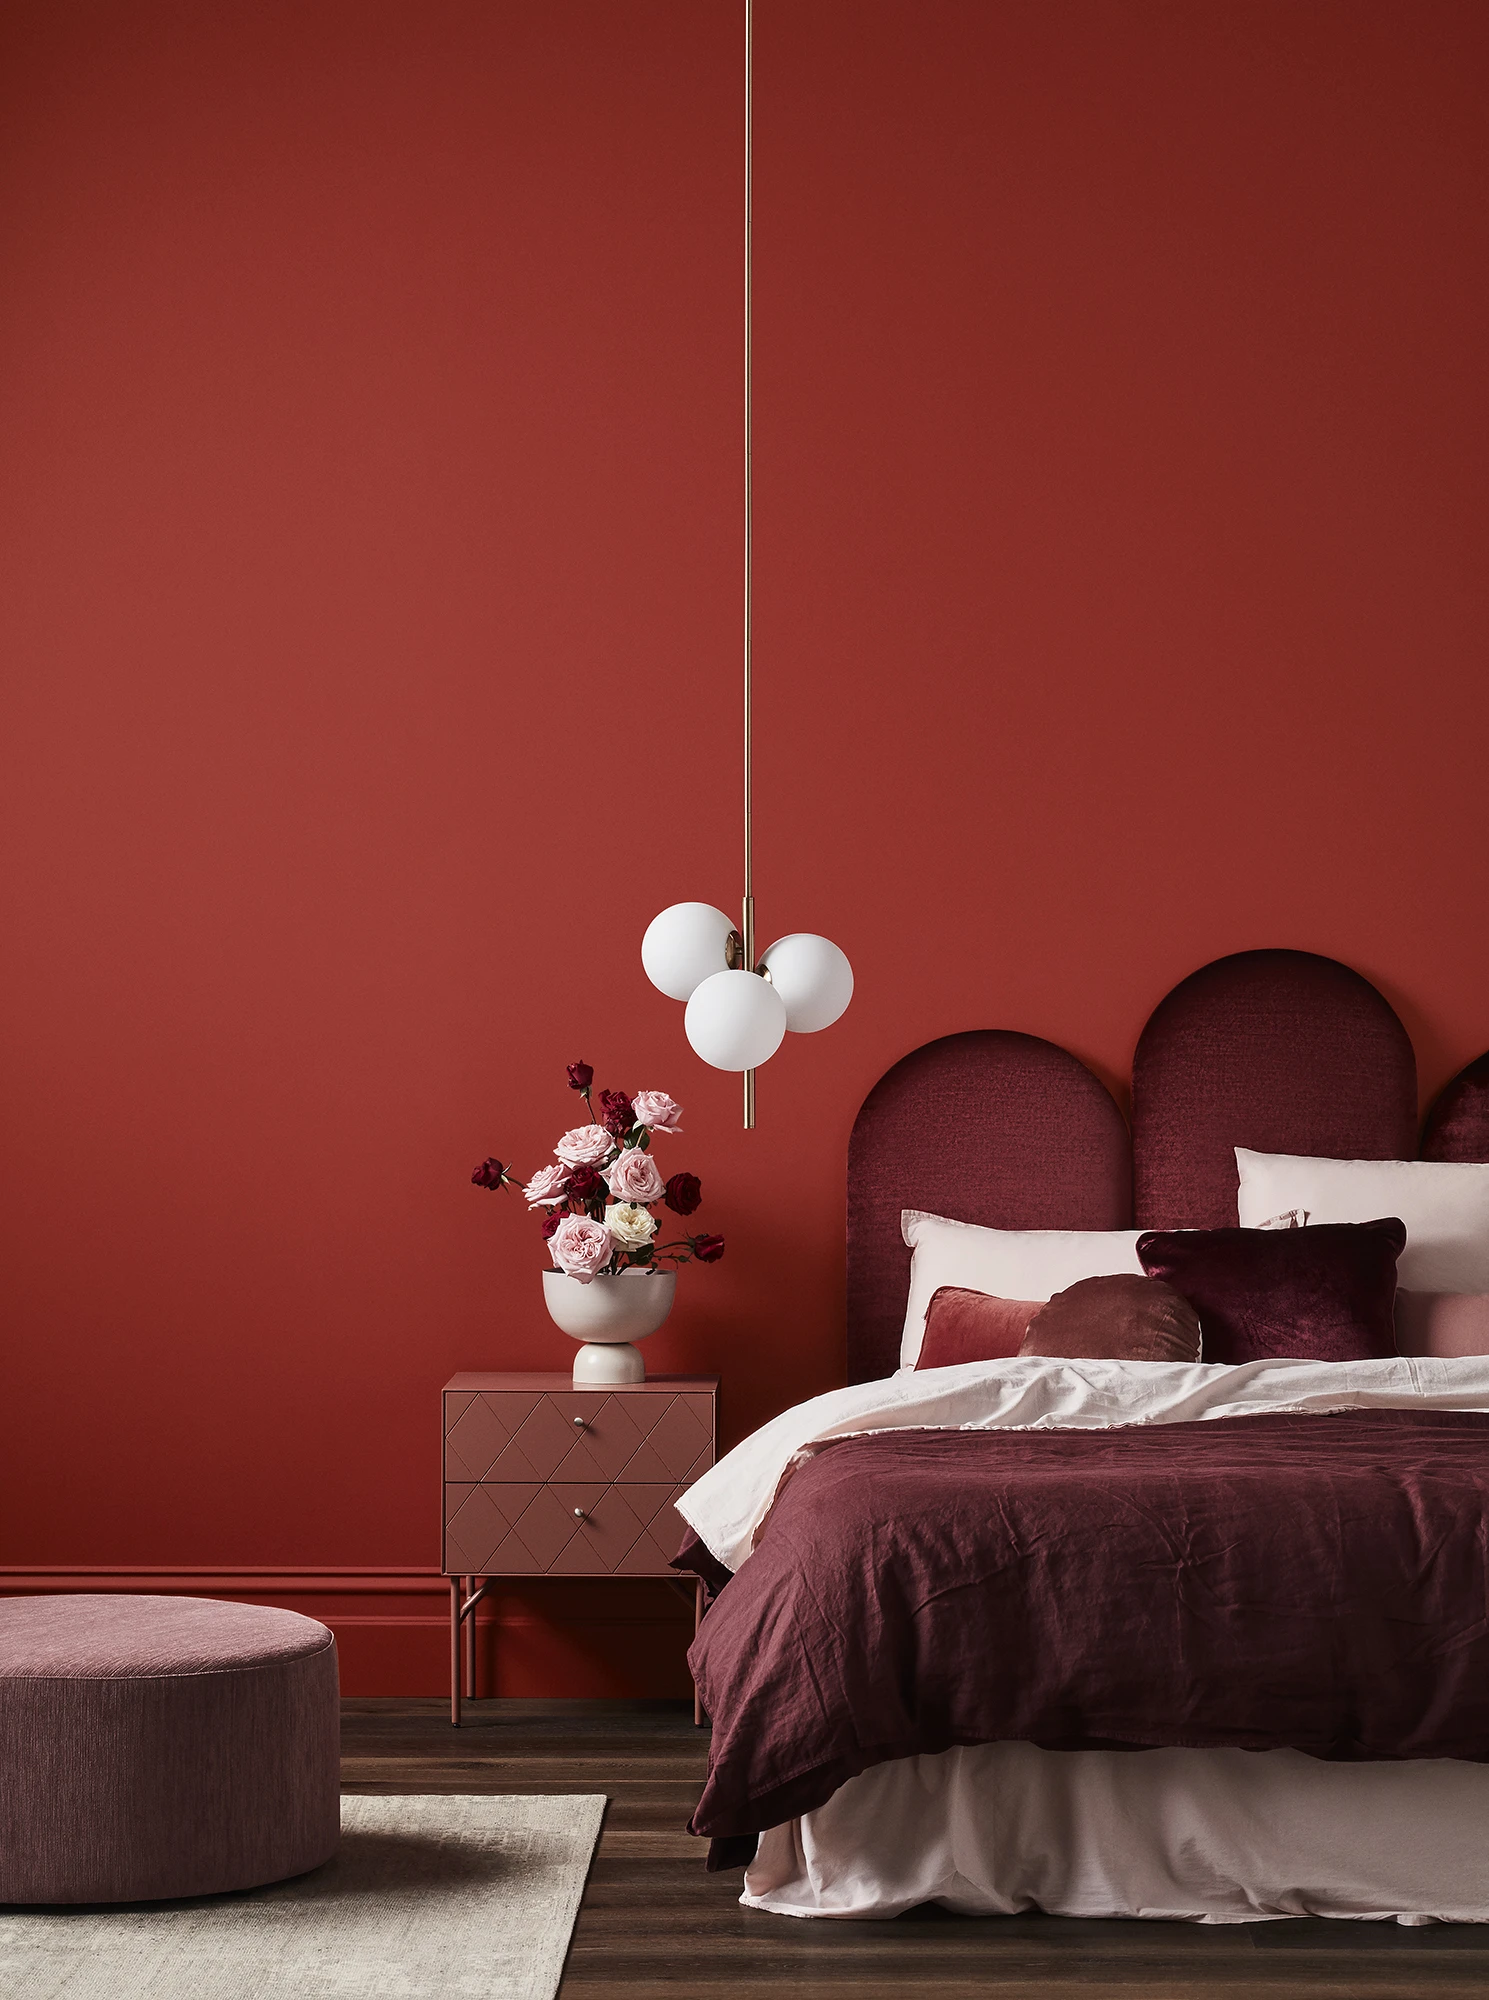 Red themed bedroom with velvet bed, bedside table and flowers in a vase.